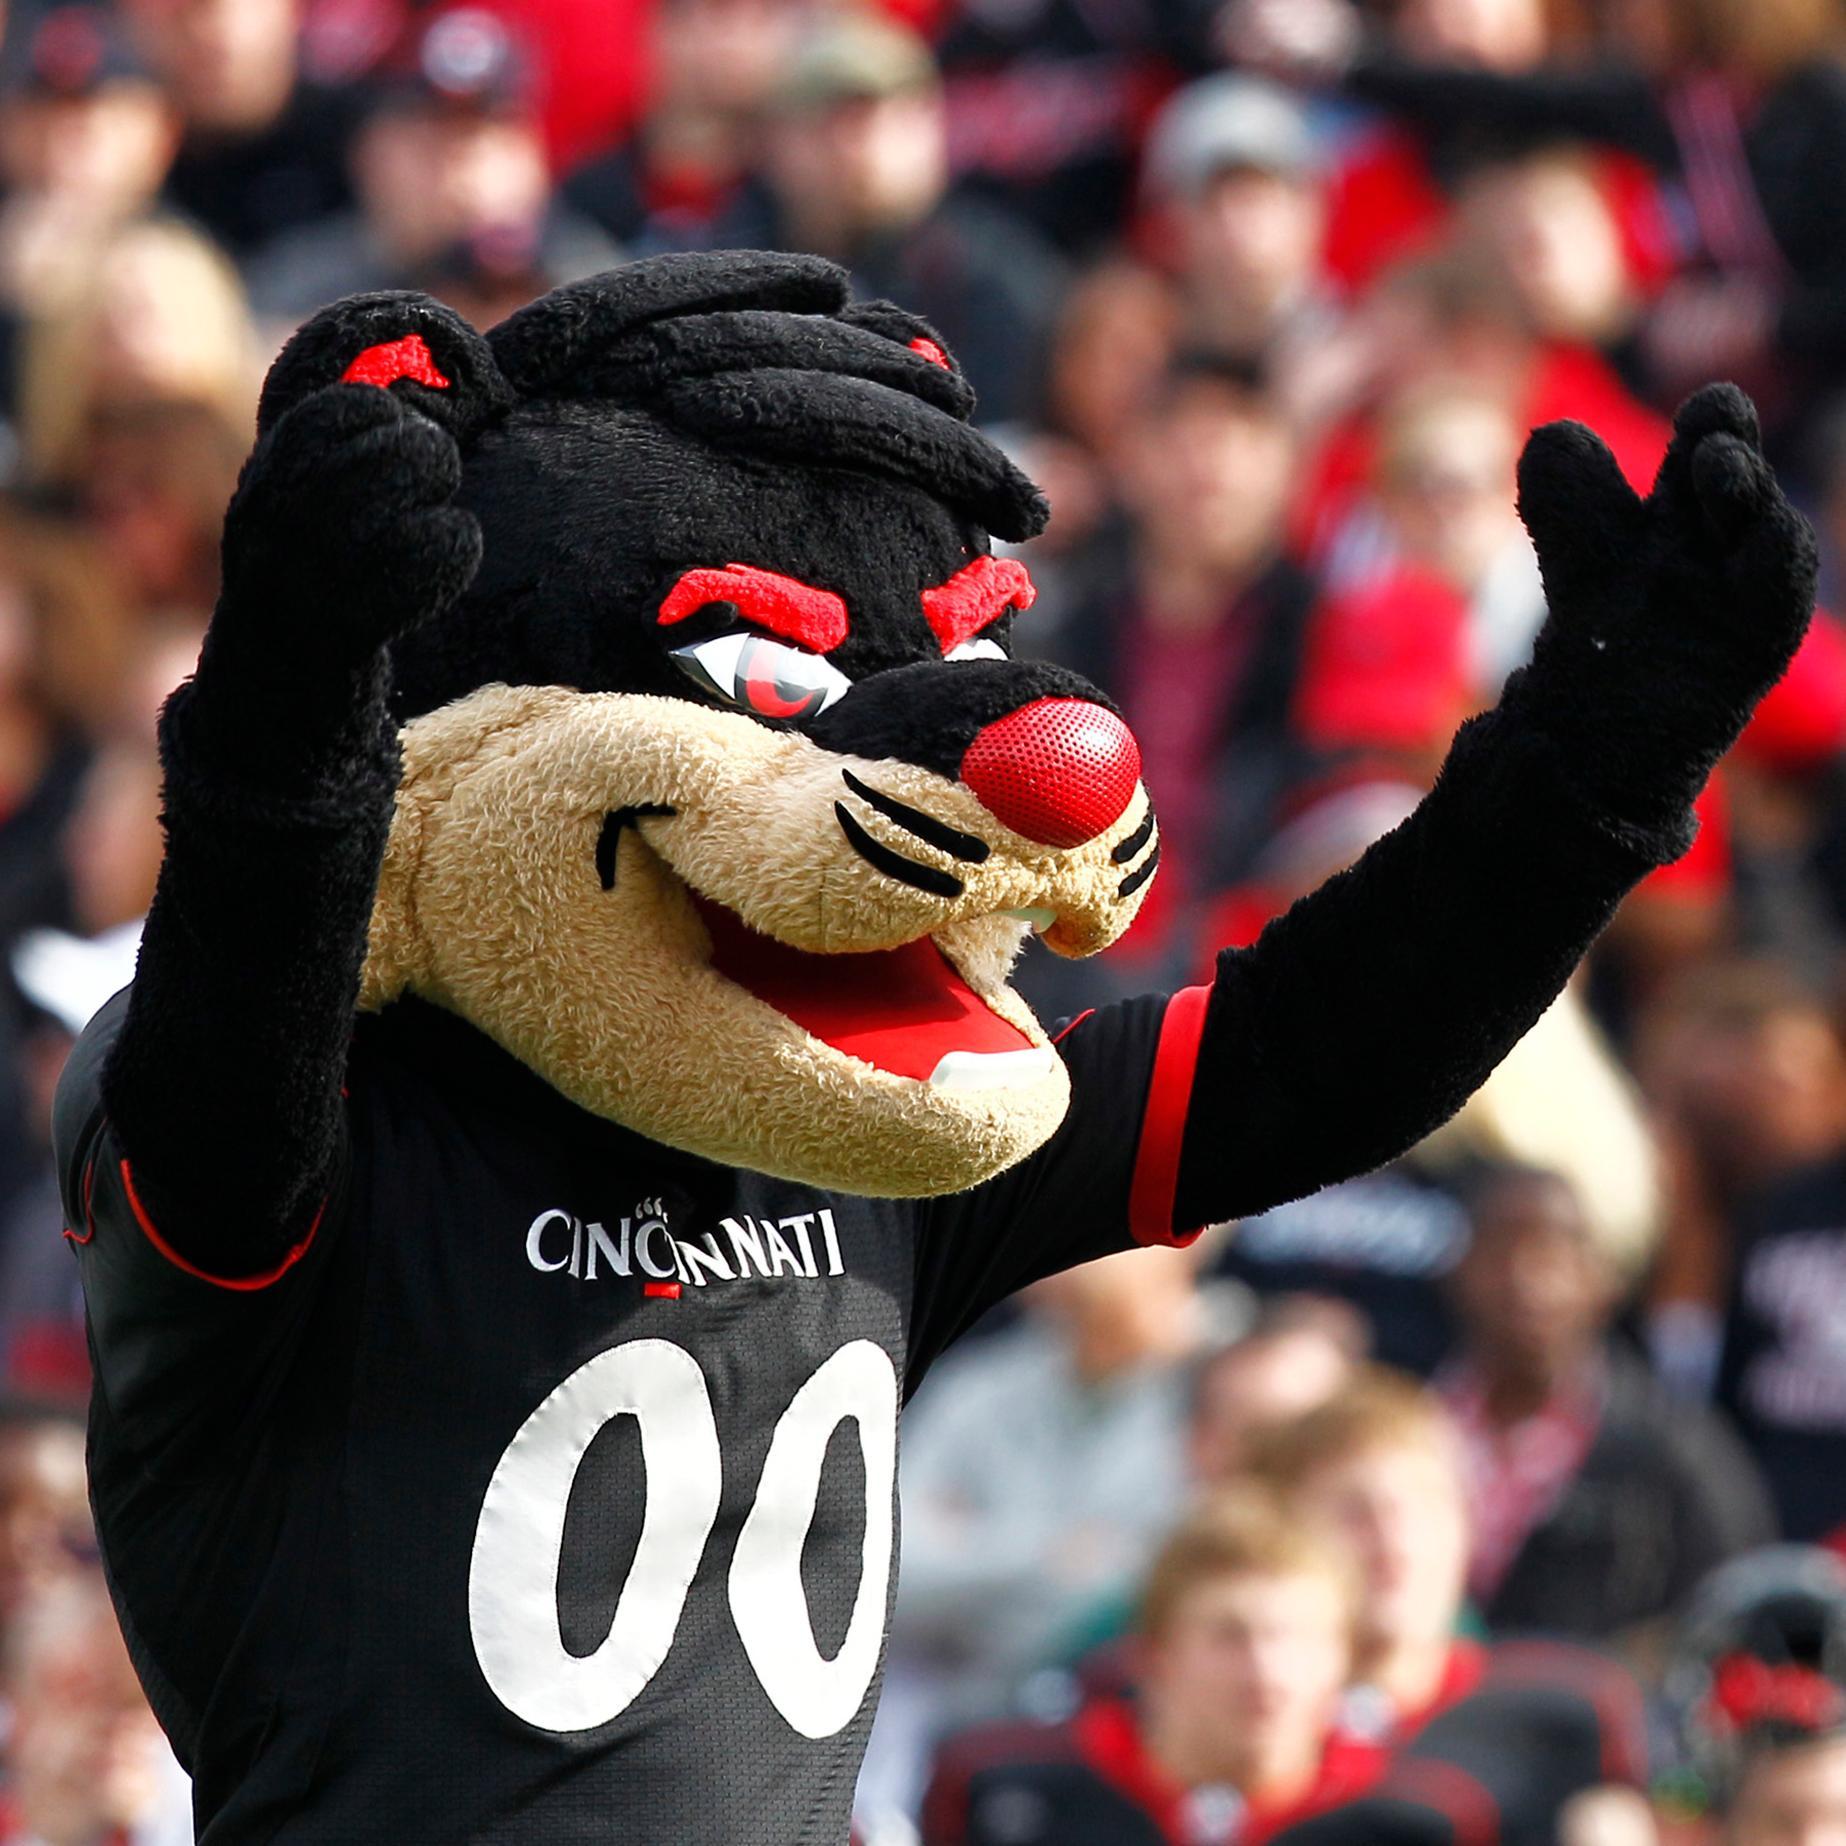 Sports news and community around the Cincinnati Bearcats from the @ScoutMedia network.